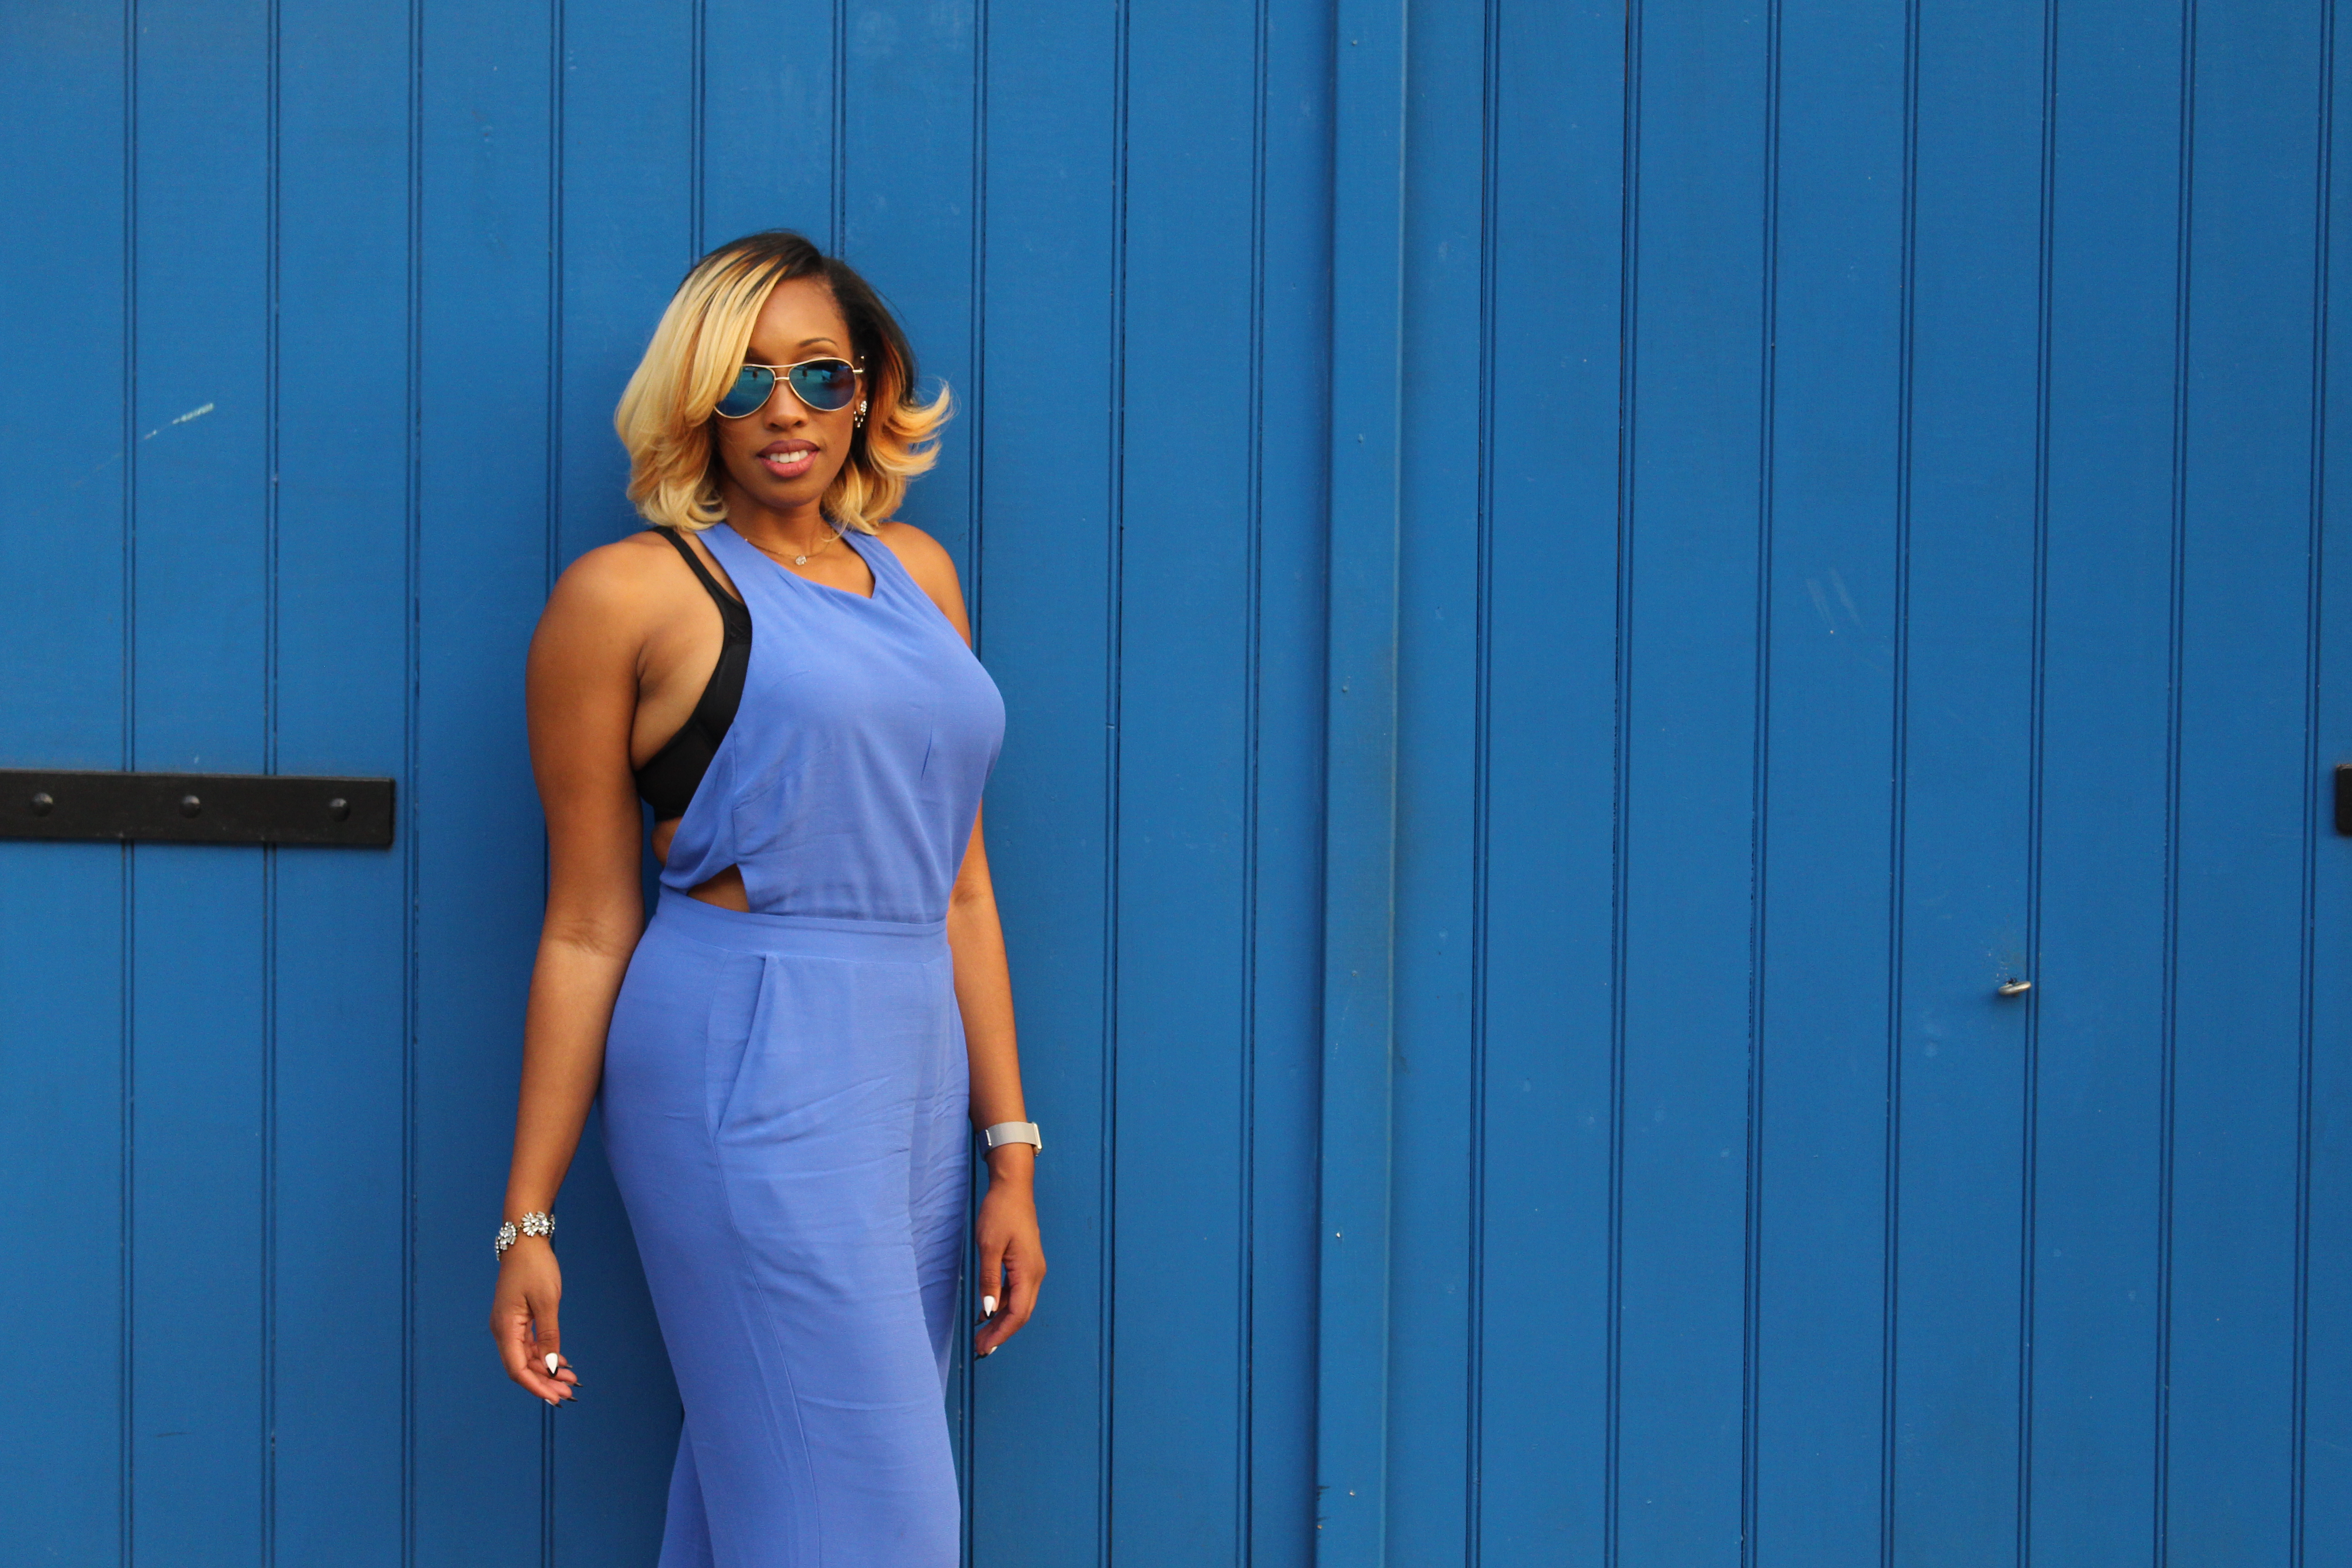 Fashion, Foodie And Flawless NOLA Moments With Ford #FordUP